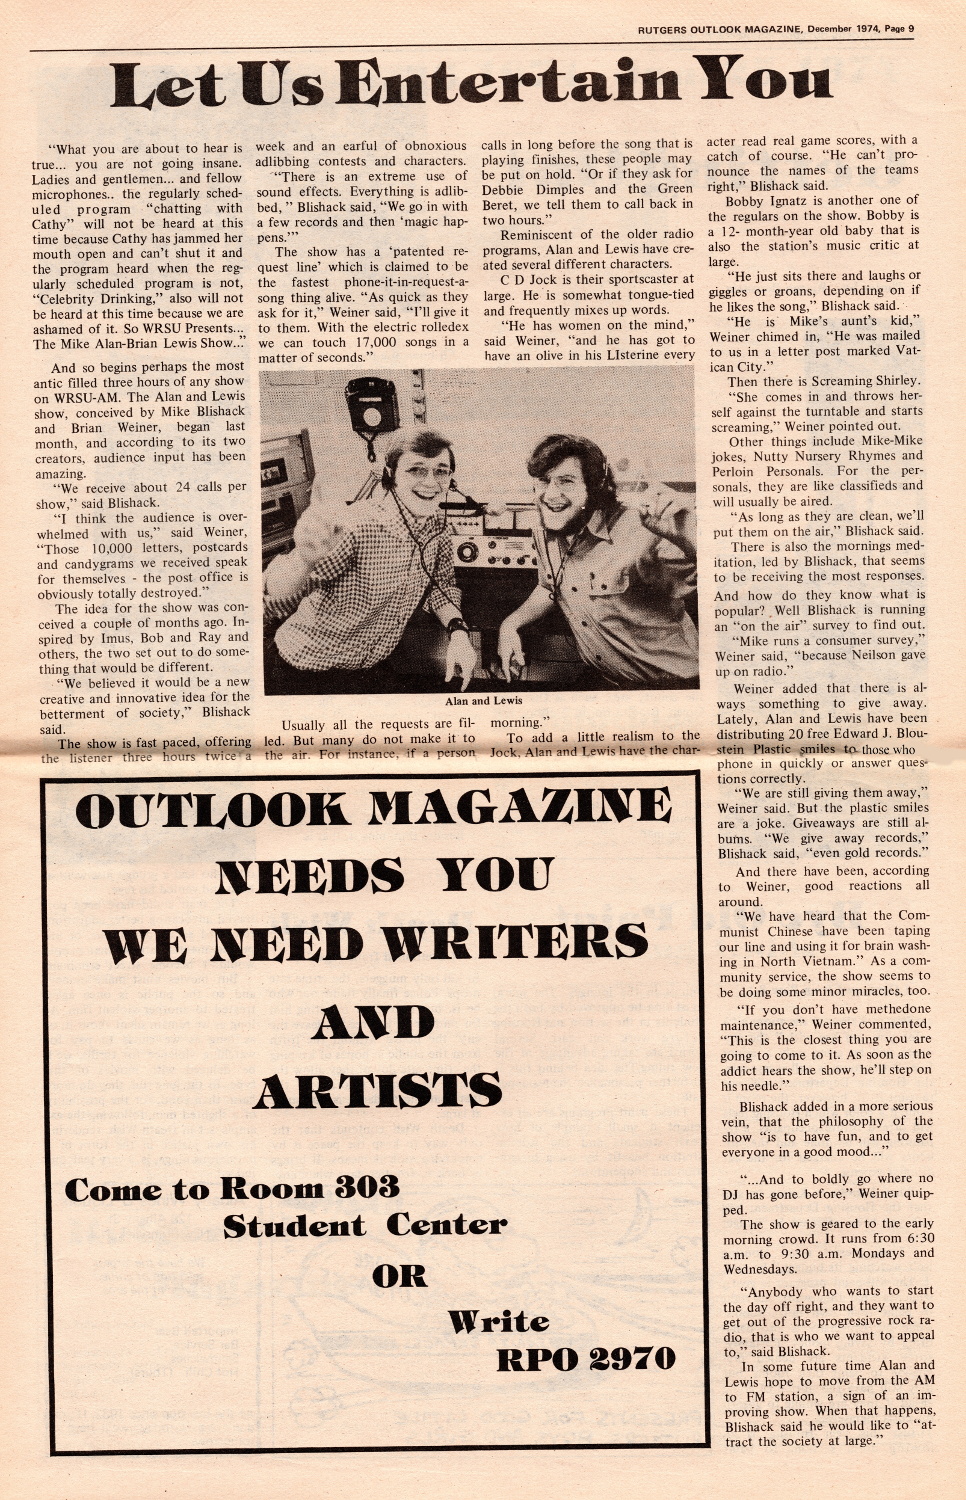 1974 - Alan and Lewis - Rutgers Outlook Magazine